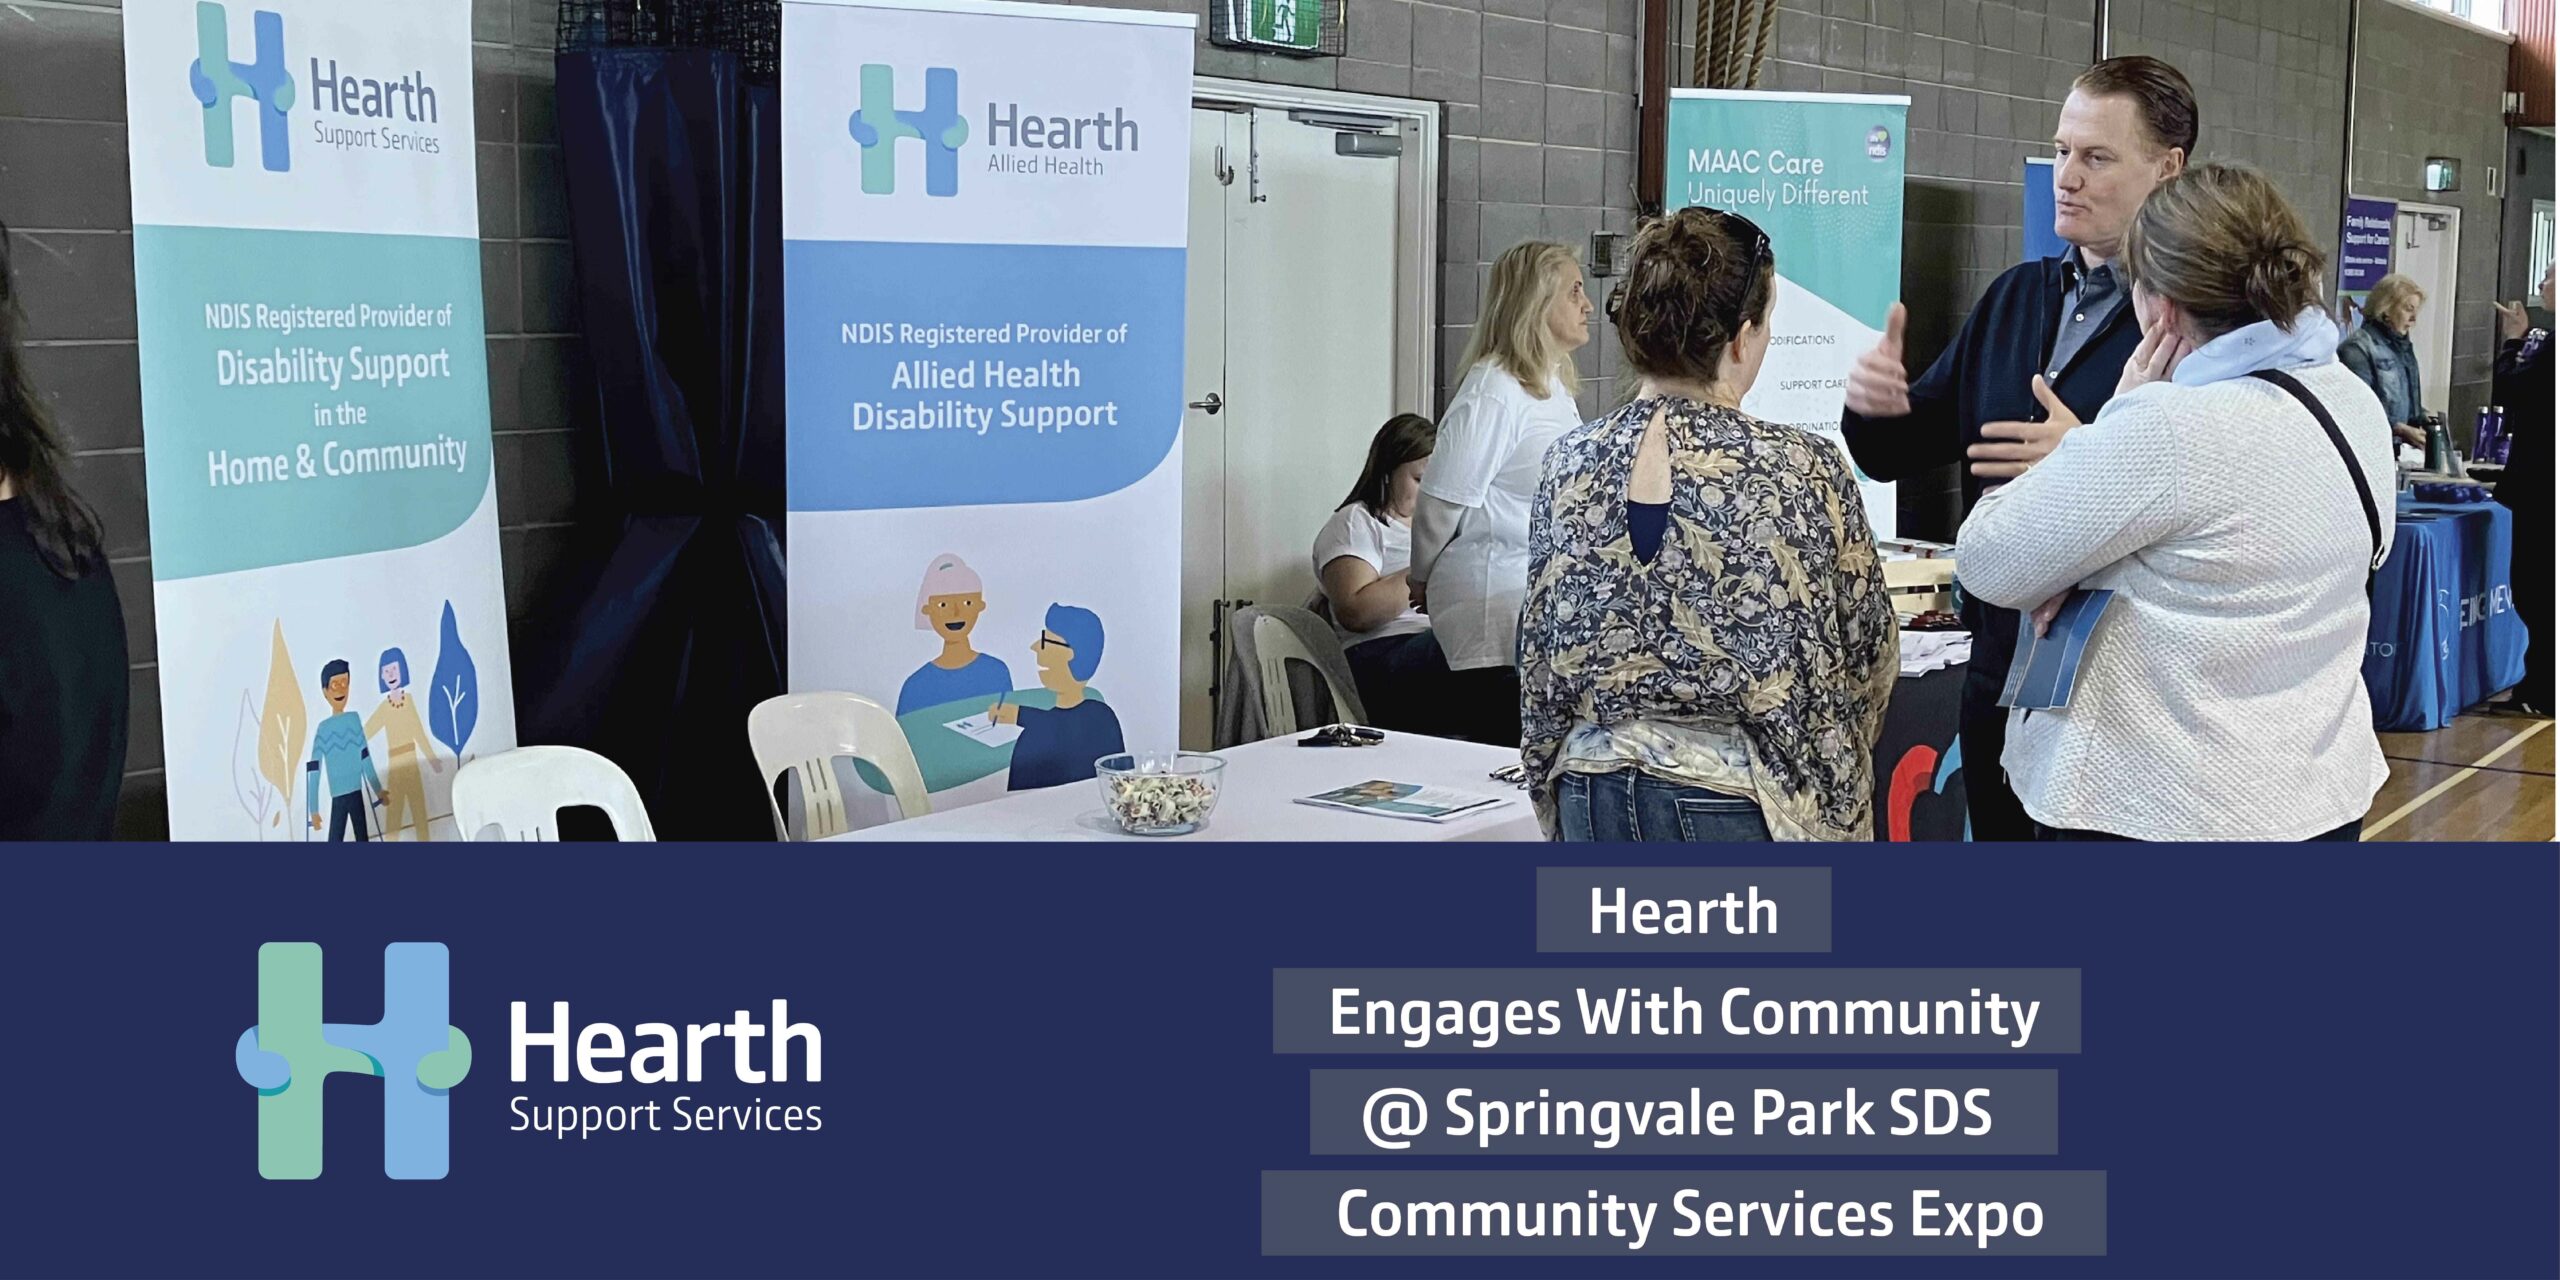 Justin Scanlon from Hearth Engages with Springvale Park Special Development School Community